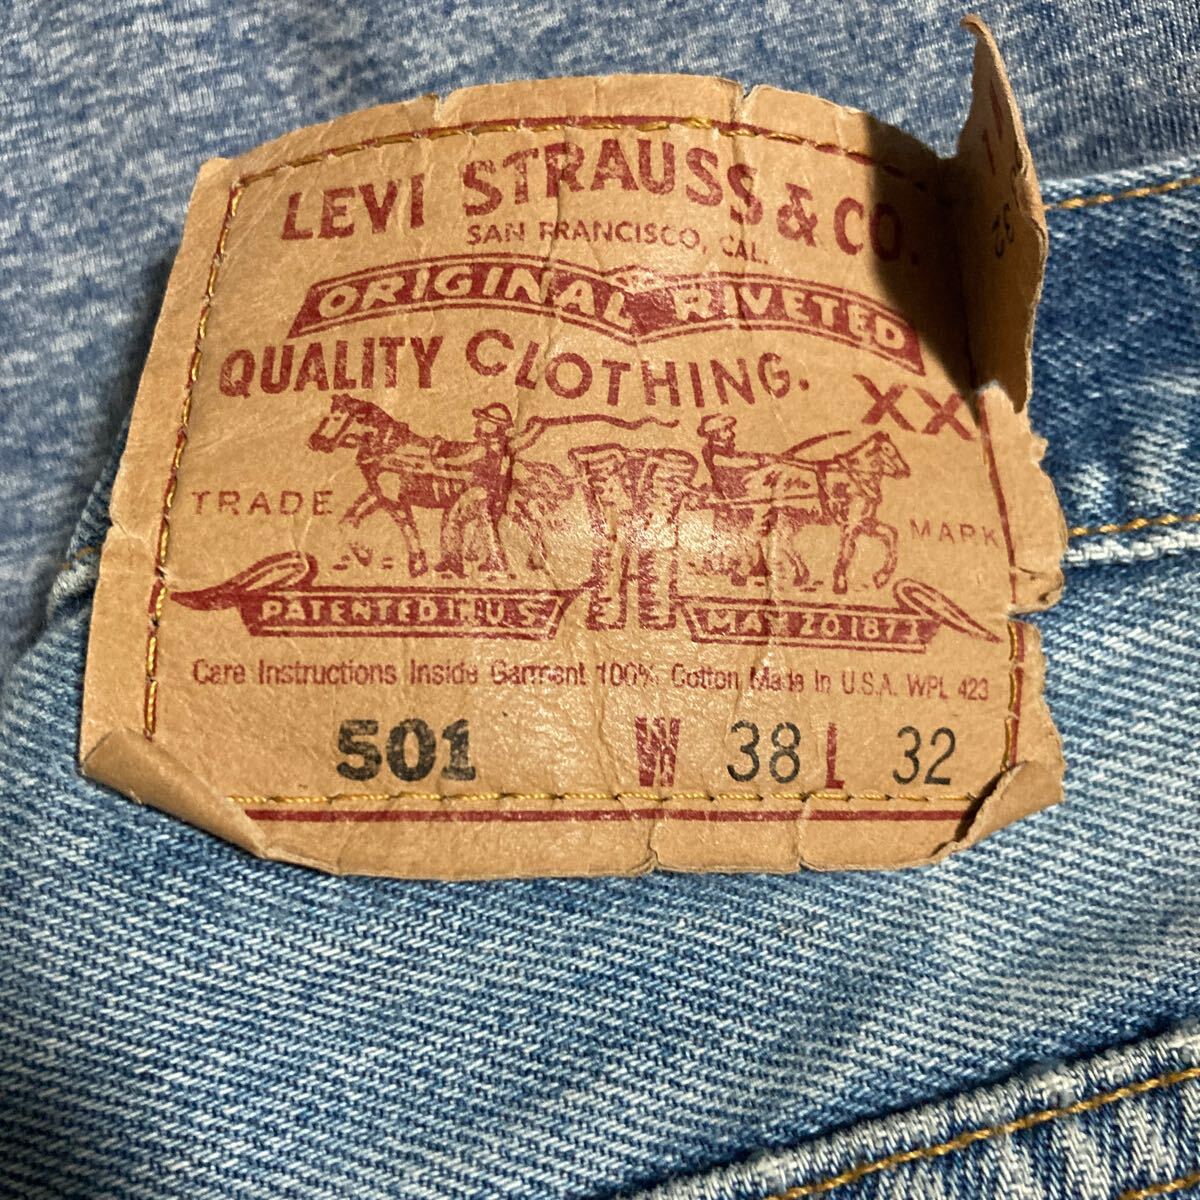 94 year made 90s Vintage LEVIS Levi's 501 USA made strut Denim pants jeans ji- bread W38 L32 66 previous term America made Levi